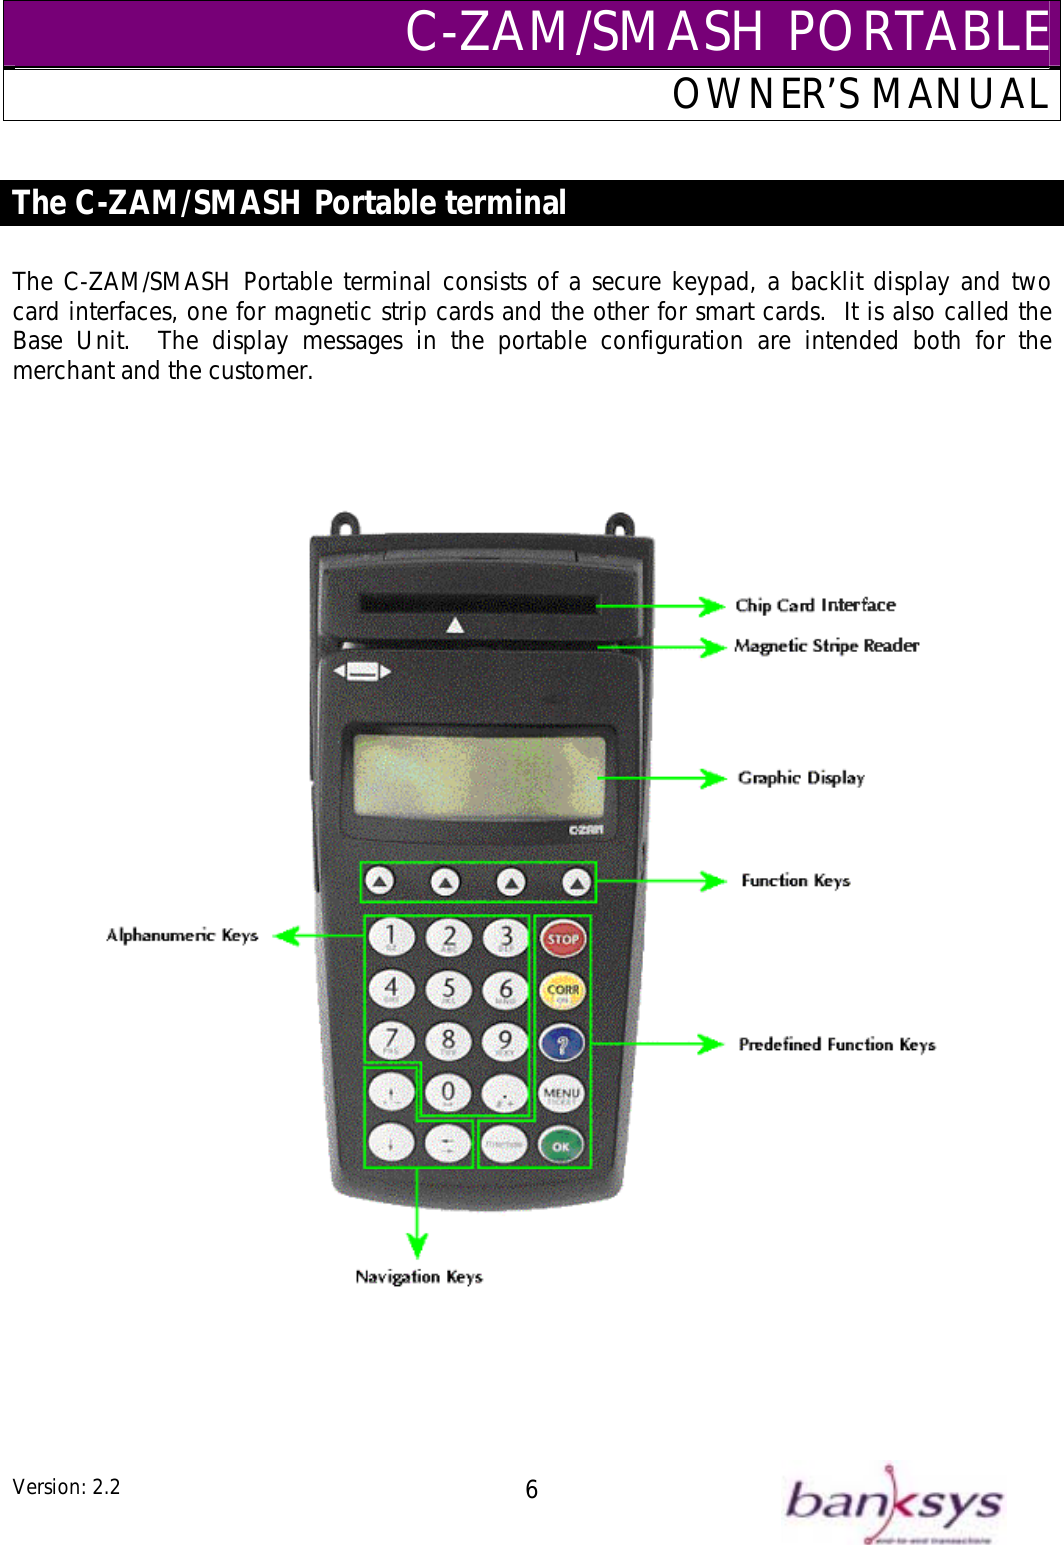 C-ZAM/SMASH PORTABLEOWNER’S MANUAL  The C-ZAM/SMASH Portable terminal  The C-ZAM/SMASH Portable terminal consists of a secure keypad, a backlit display and two card interfaces, one for magnetic strip cards and the other for smart cards.  It is also called the Base Unit.  The display messages in the portable configuration are intended both for the merchant and the customer.       Version: 2.2  6